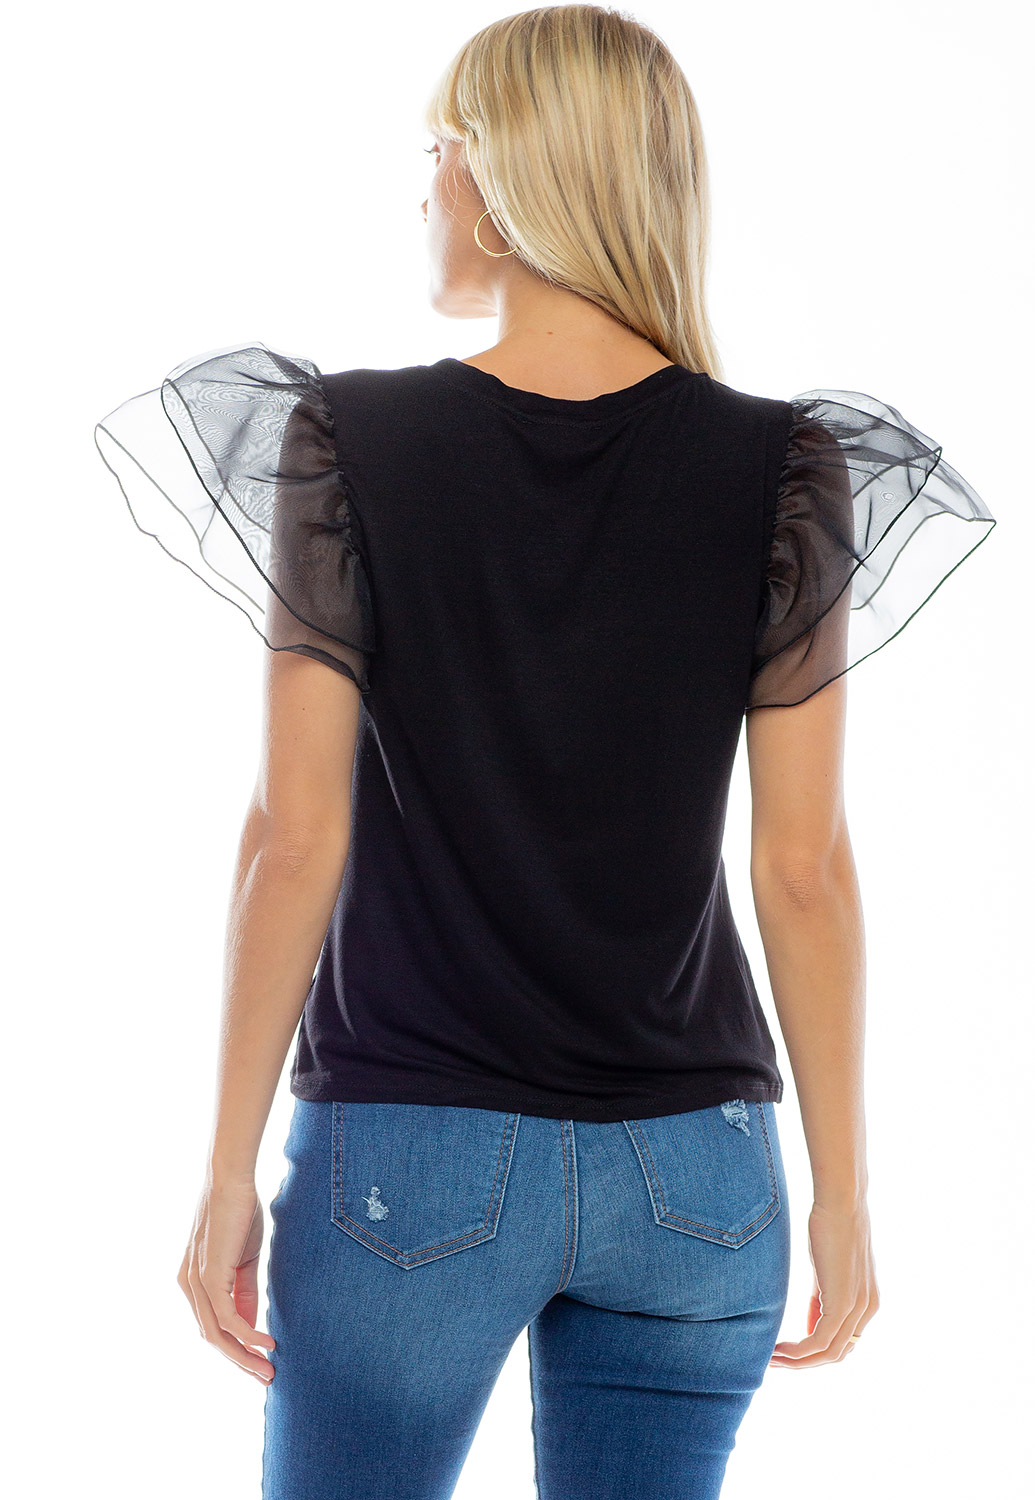 Ruffle Sleeved Graphic Top 